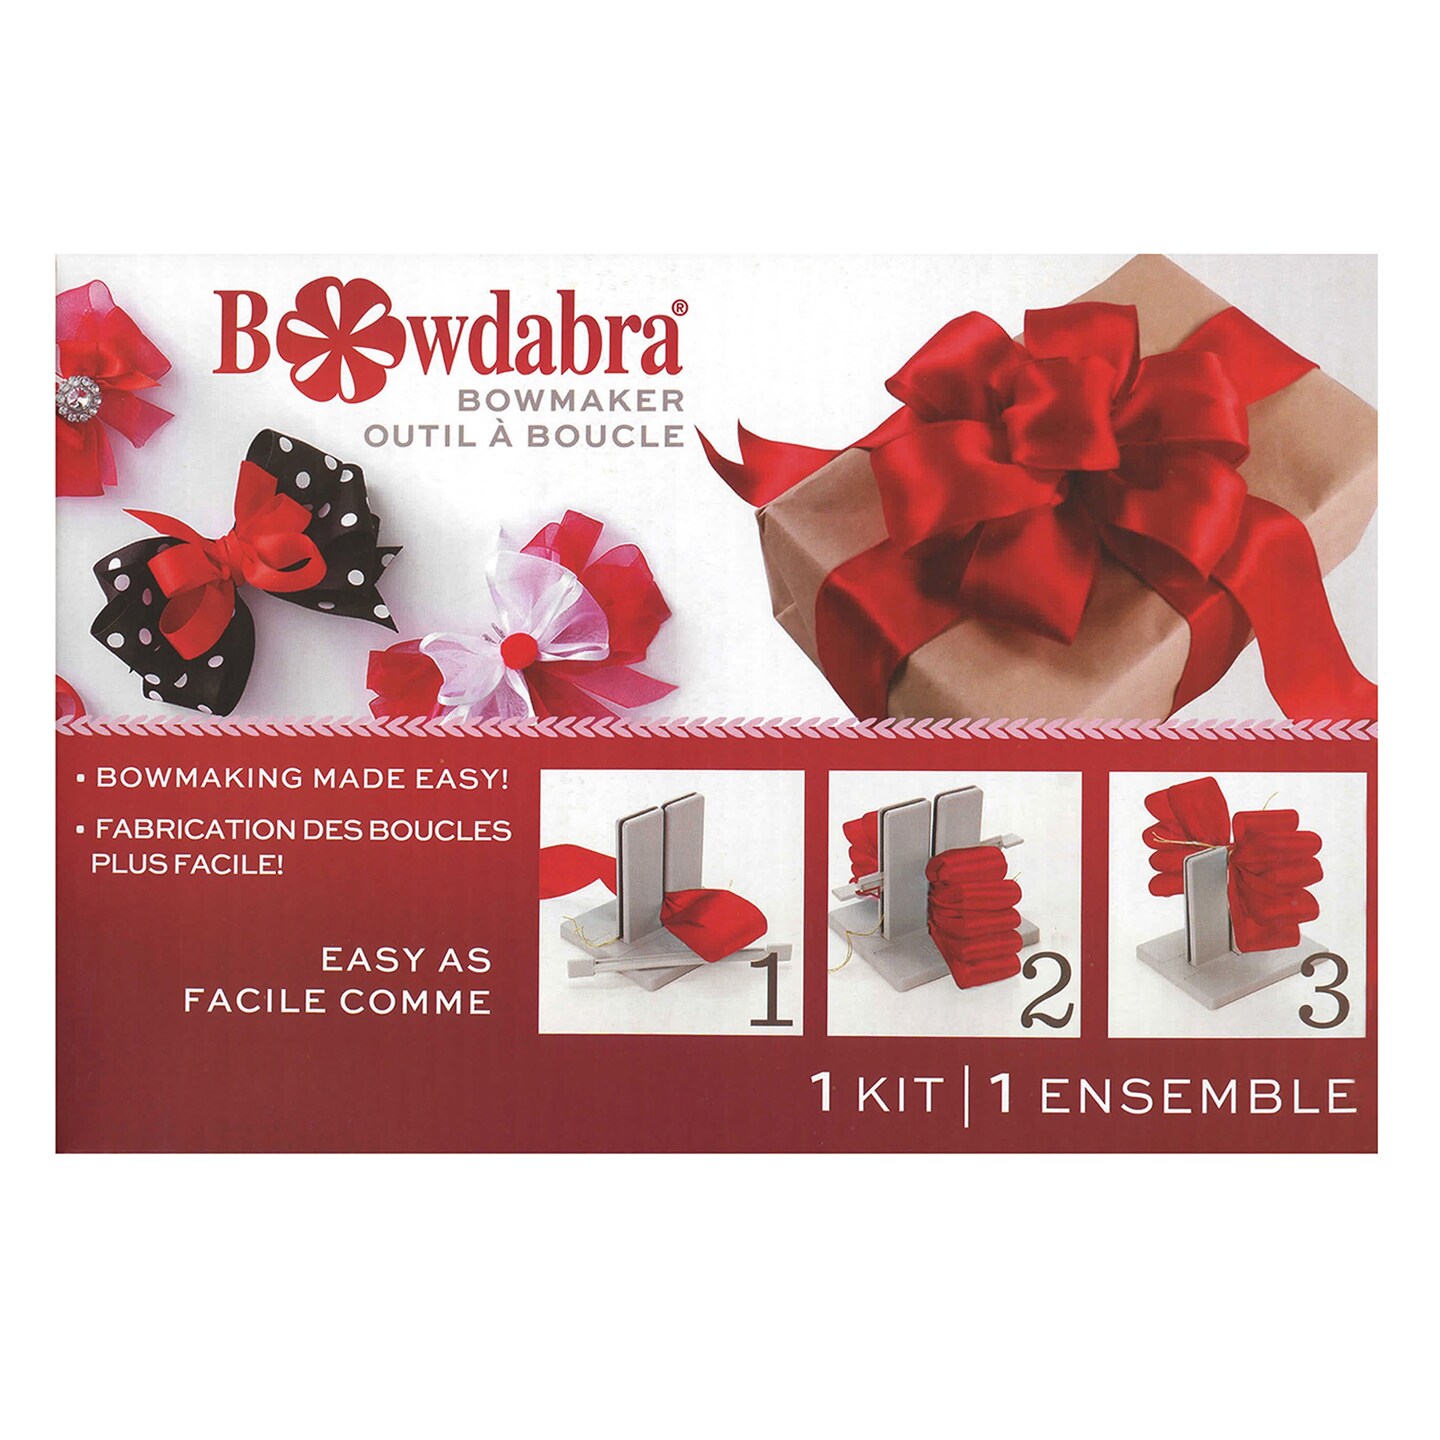 Bowdabra Bow Maker Craft Tool Create Bows Swags Decor Favors Some Wire Used